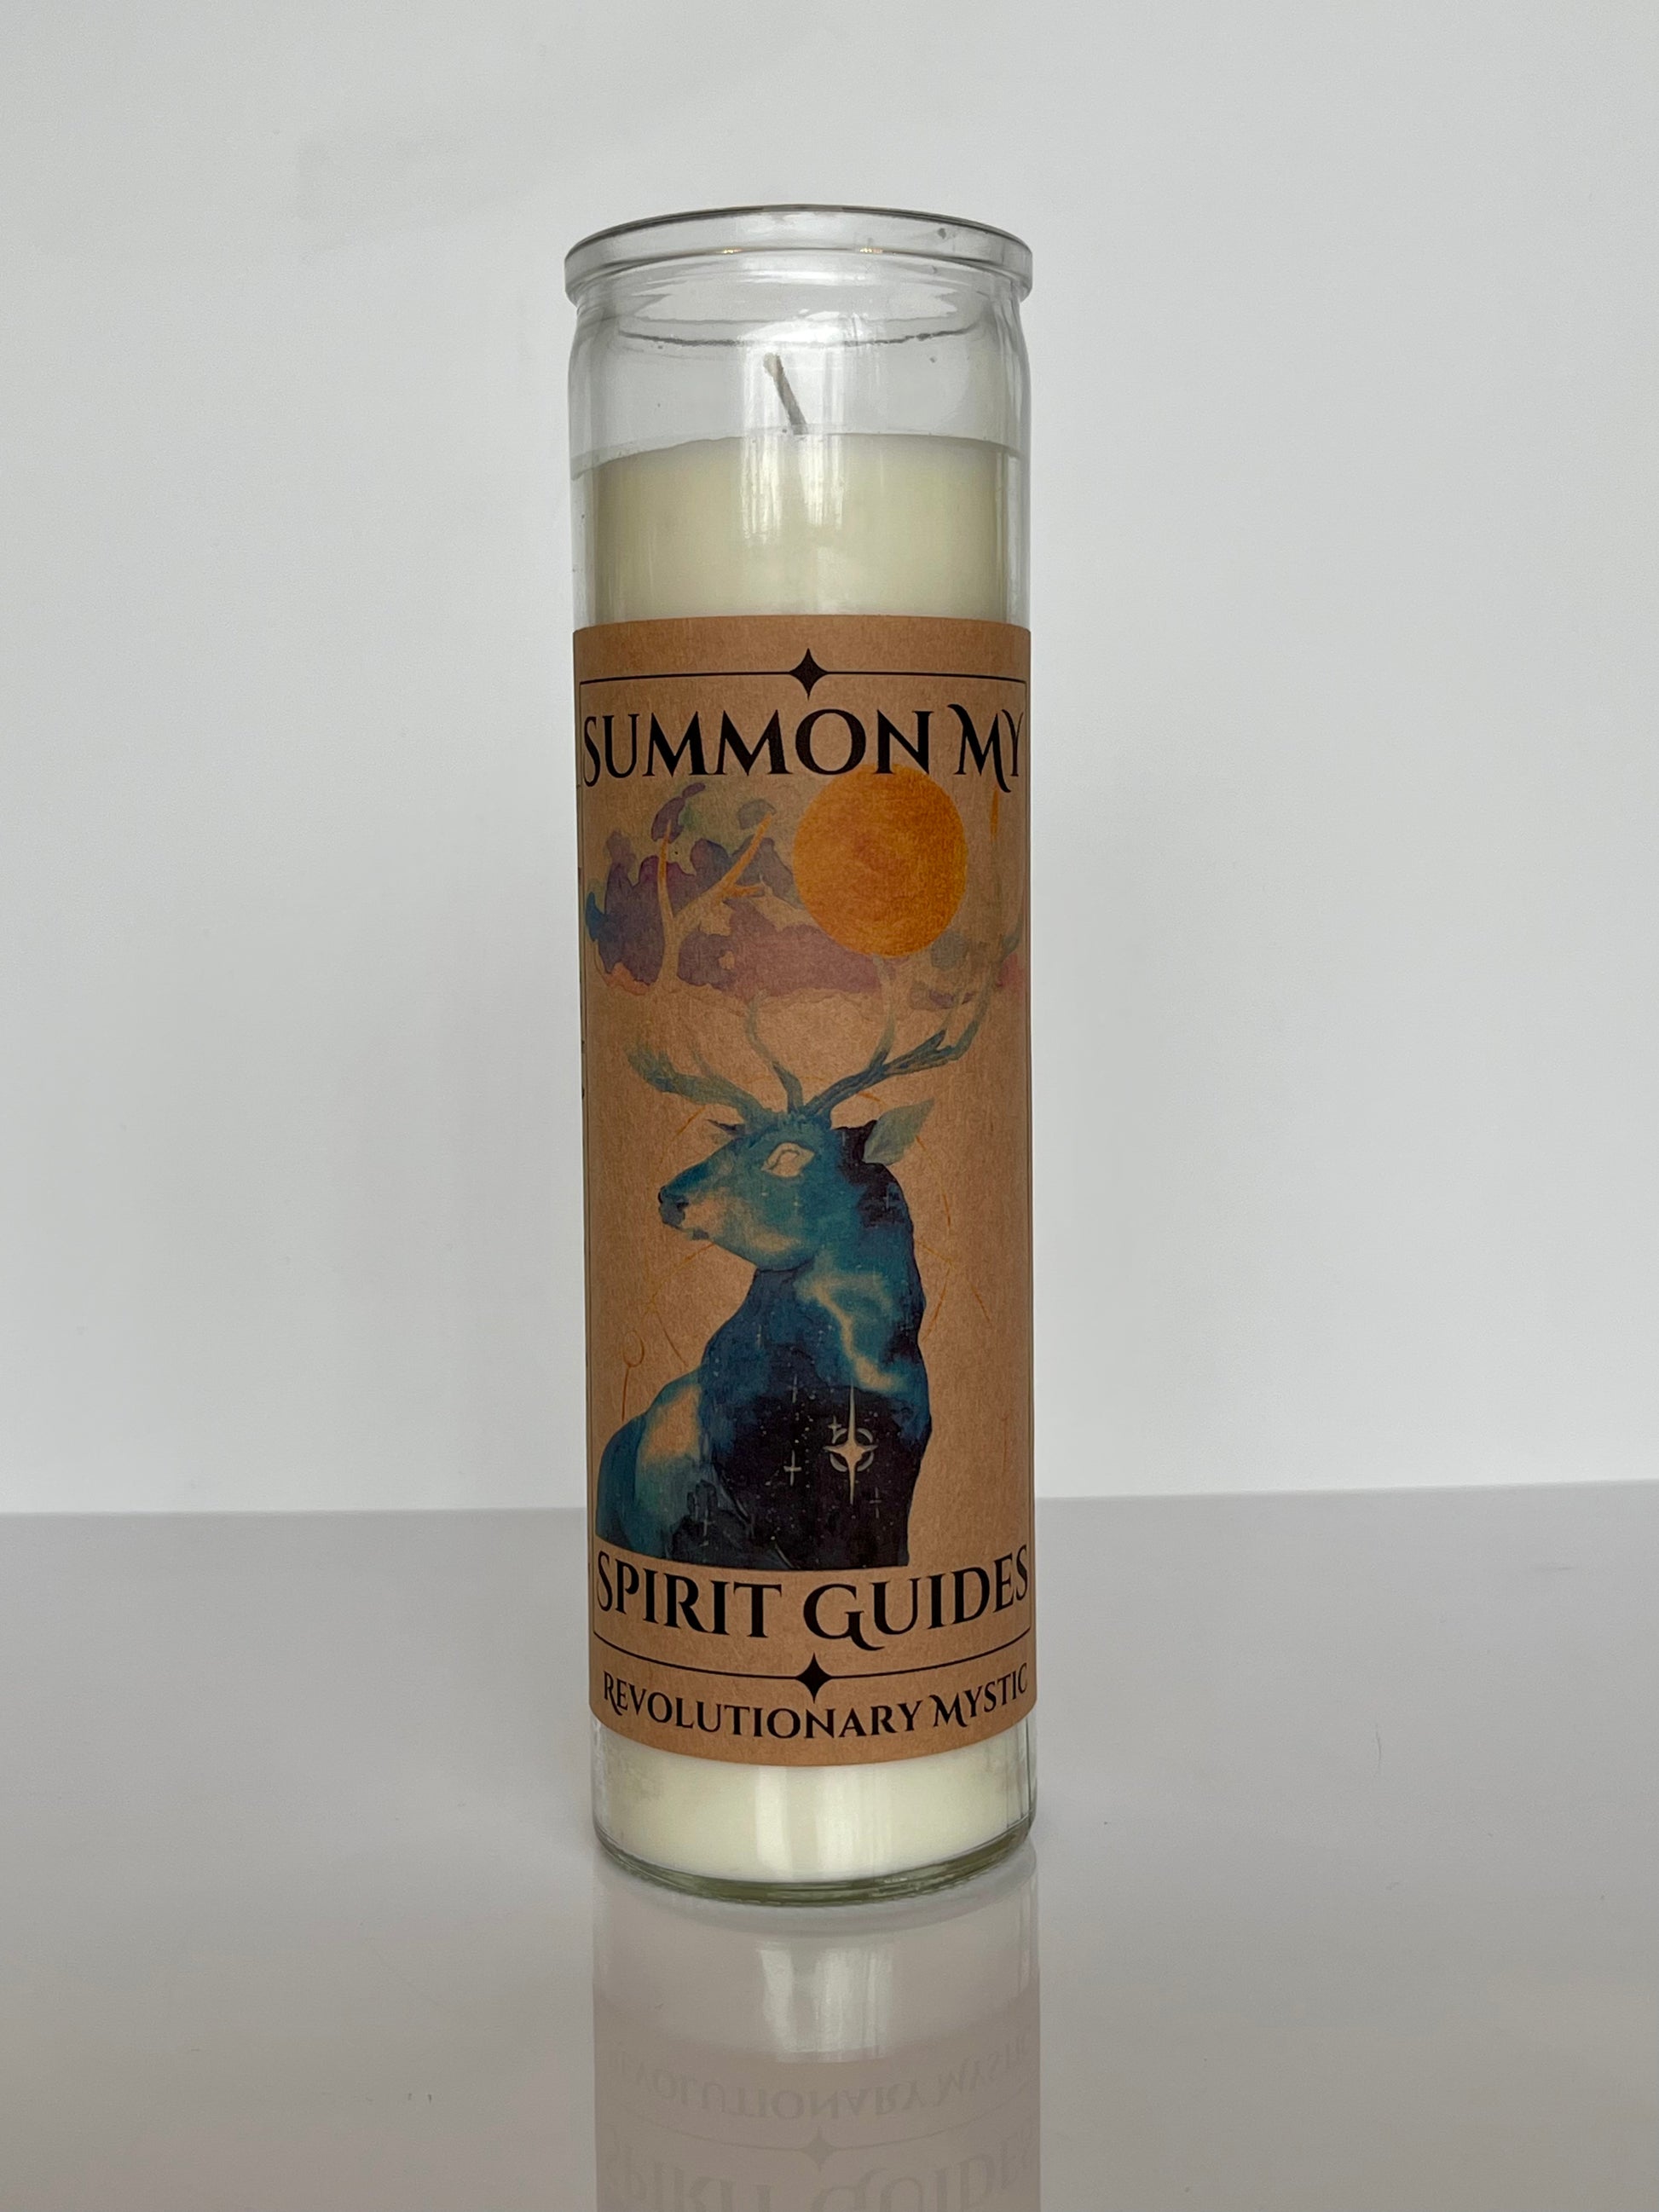 Summon My Spirit Guides Candle - Revolutionary Mystic